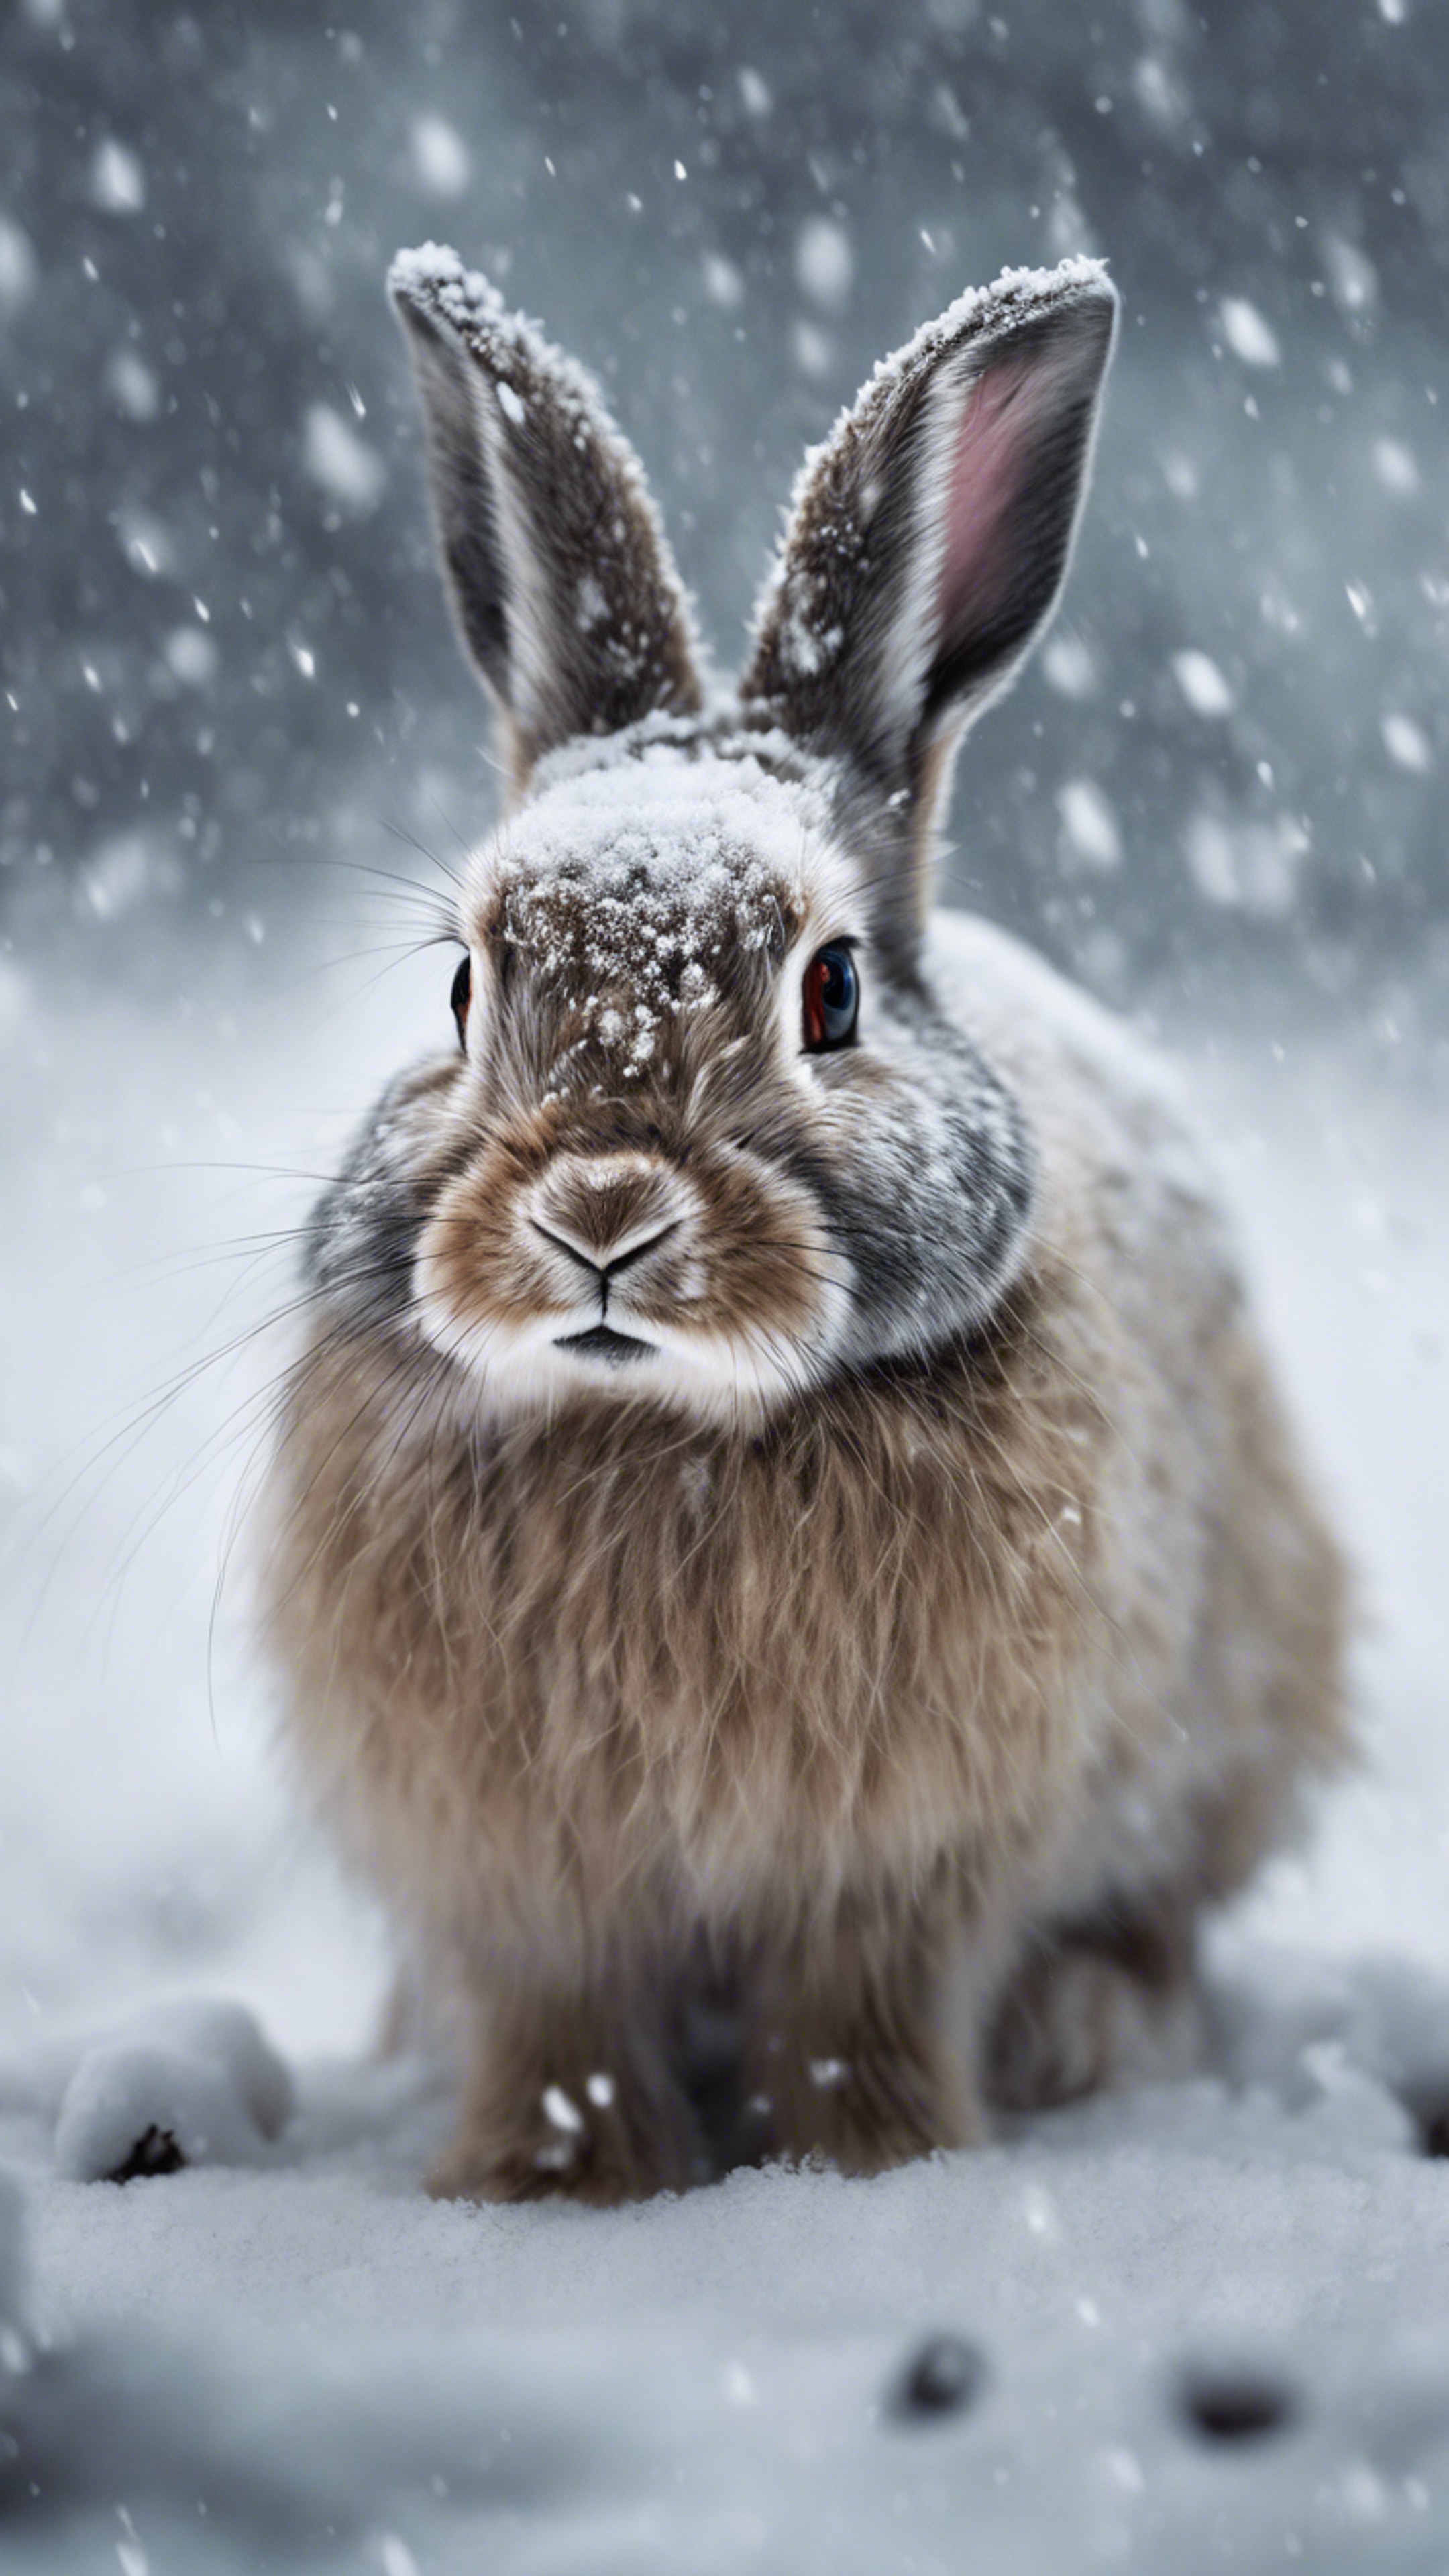 An Arctic rabbit braving a blizzard, its fur blending in with the snow. Tapeta[f8597e39ec4d4470ac43]